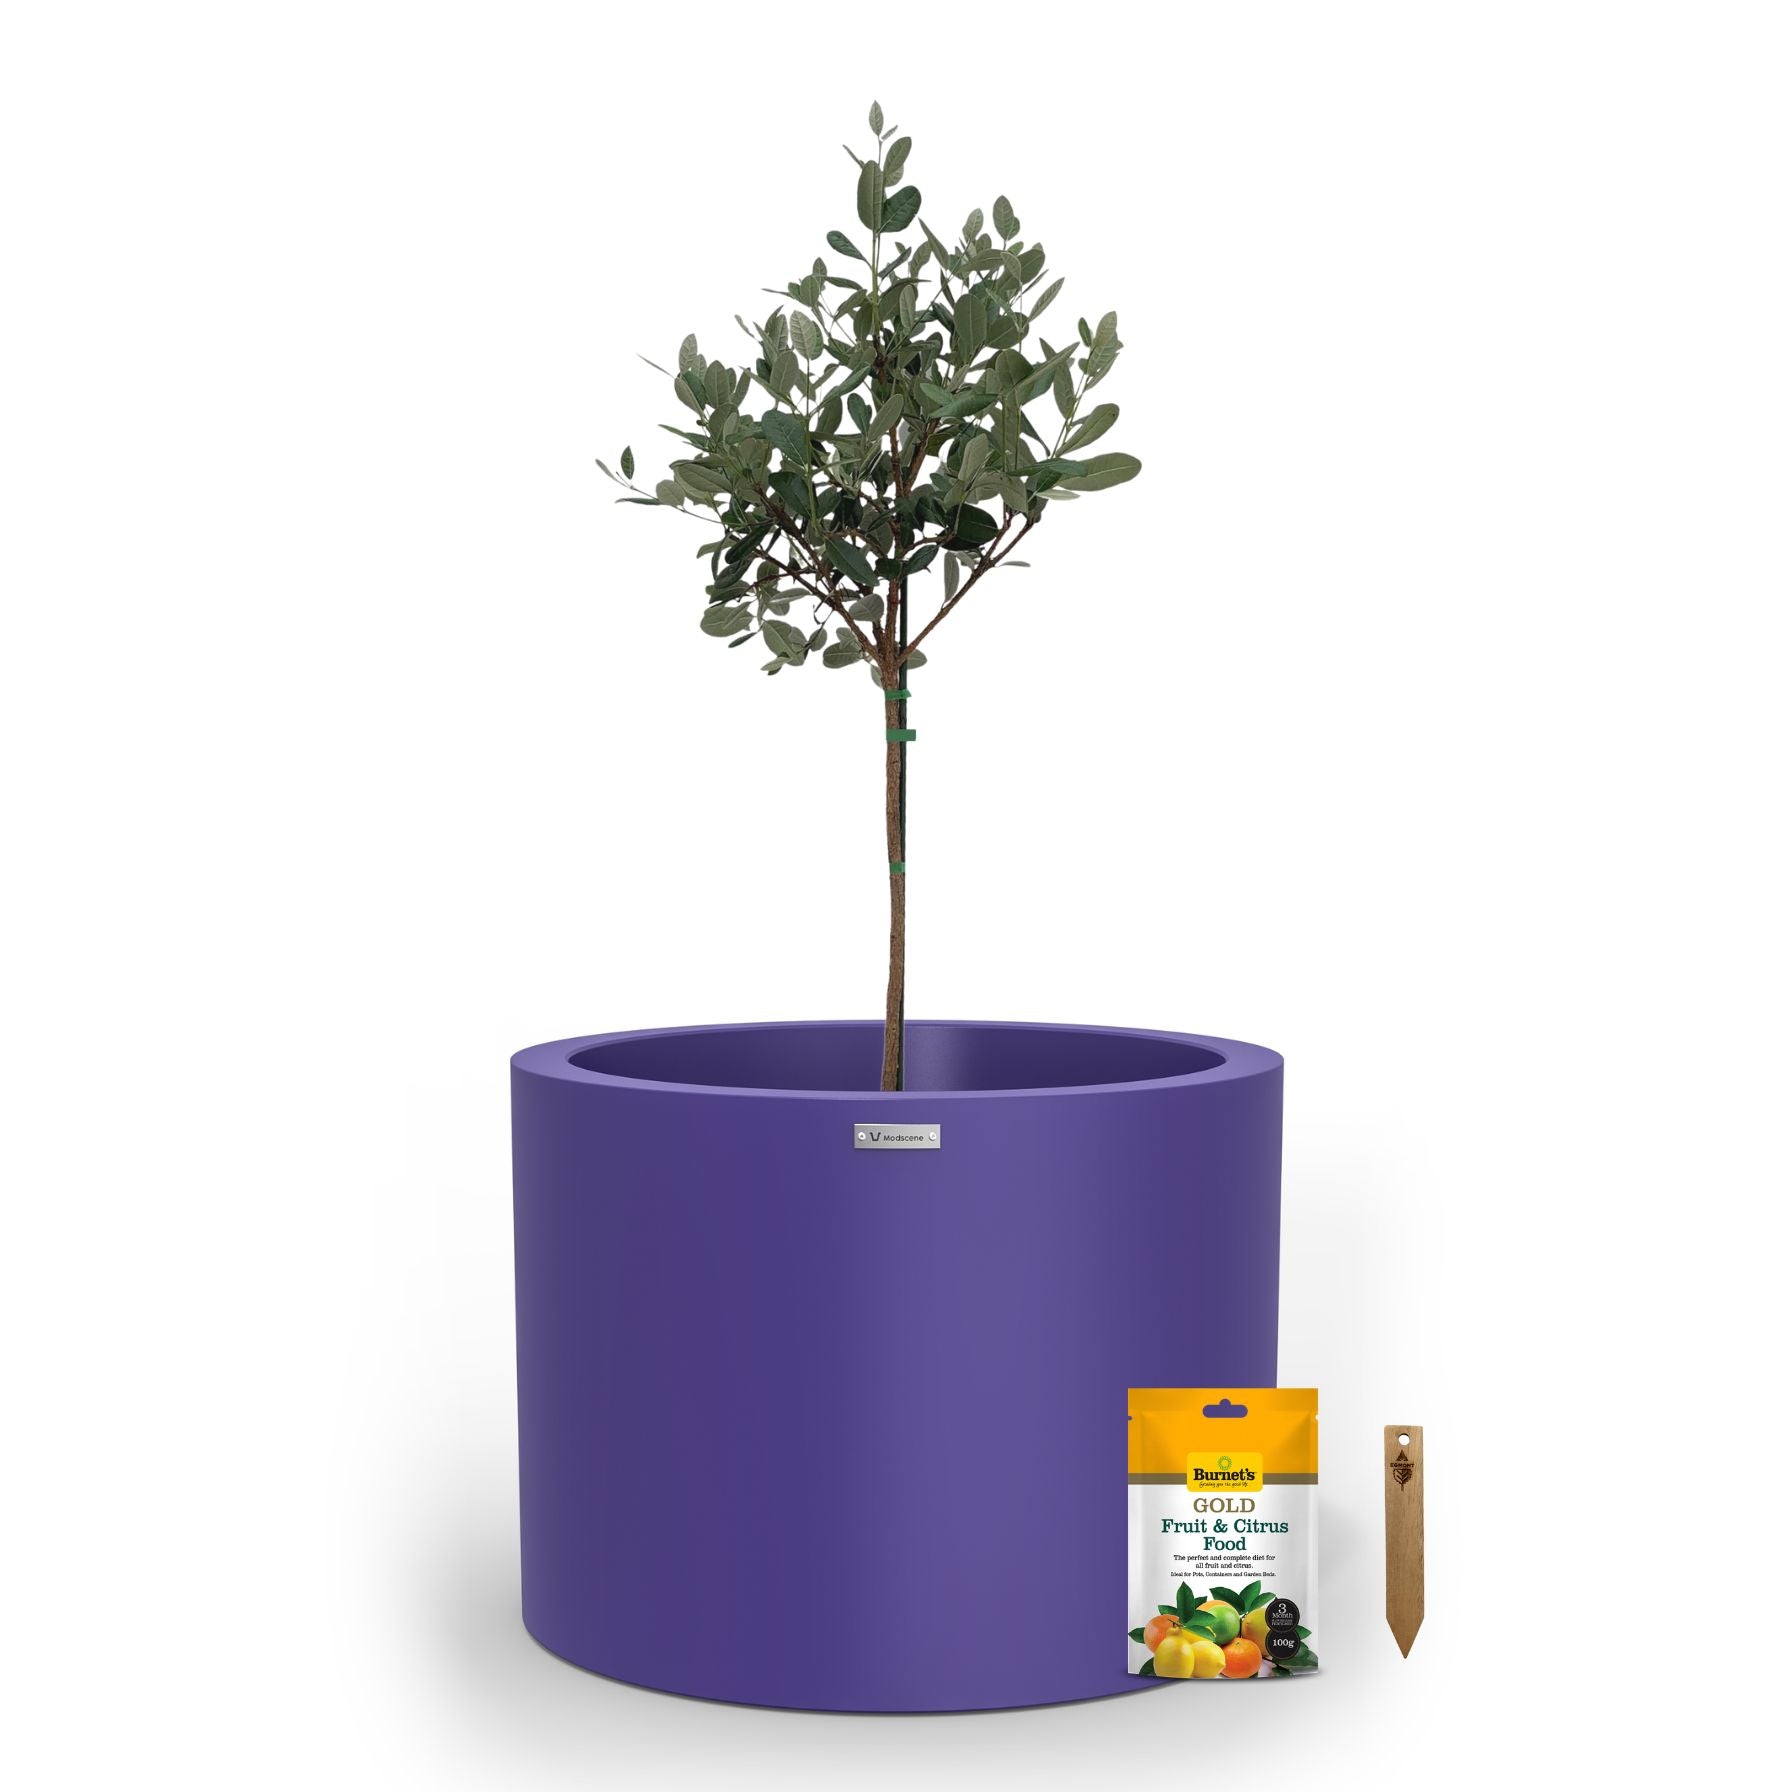 A large purple planter pot used to plant fruit trees. 